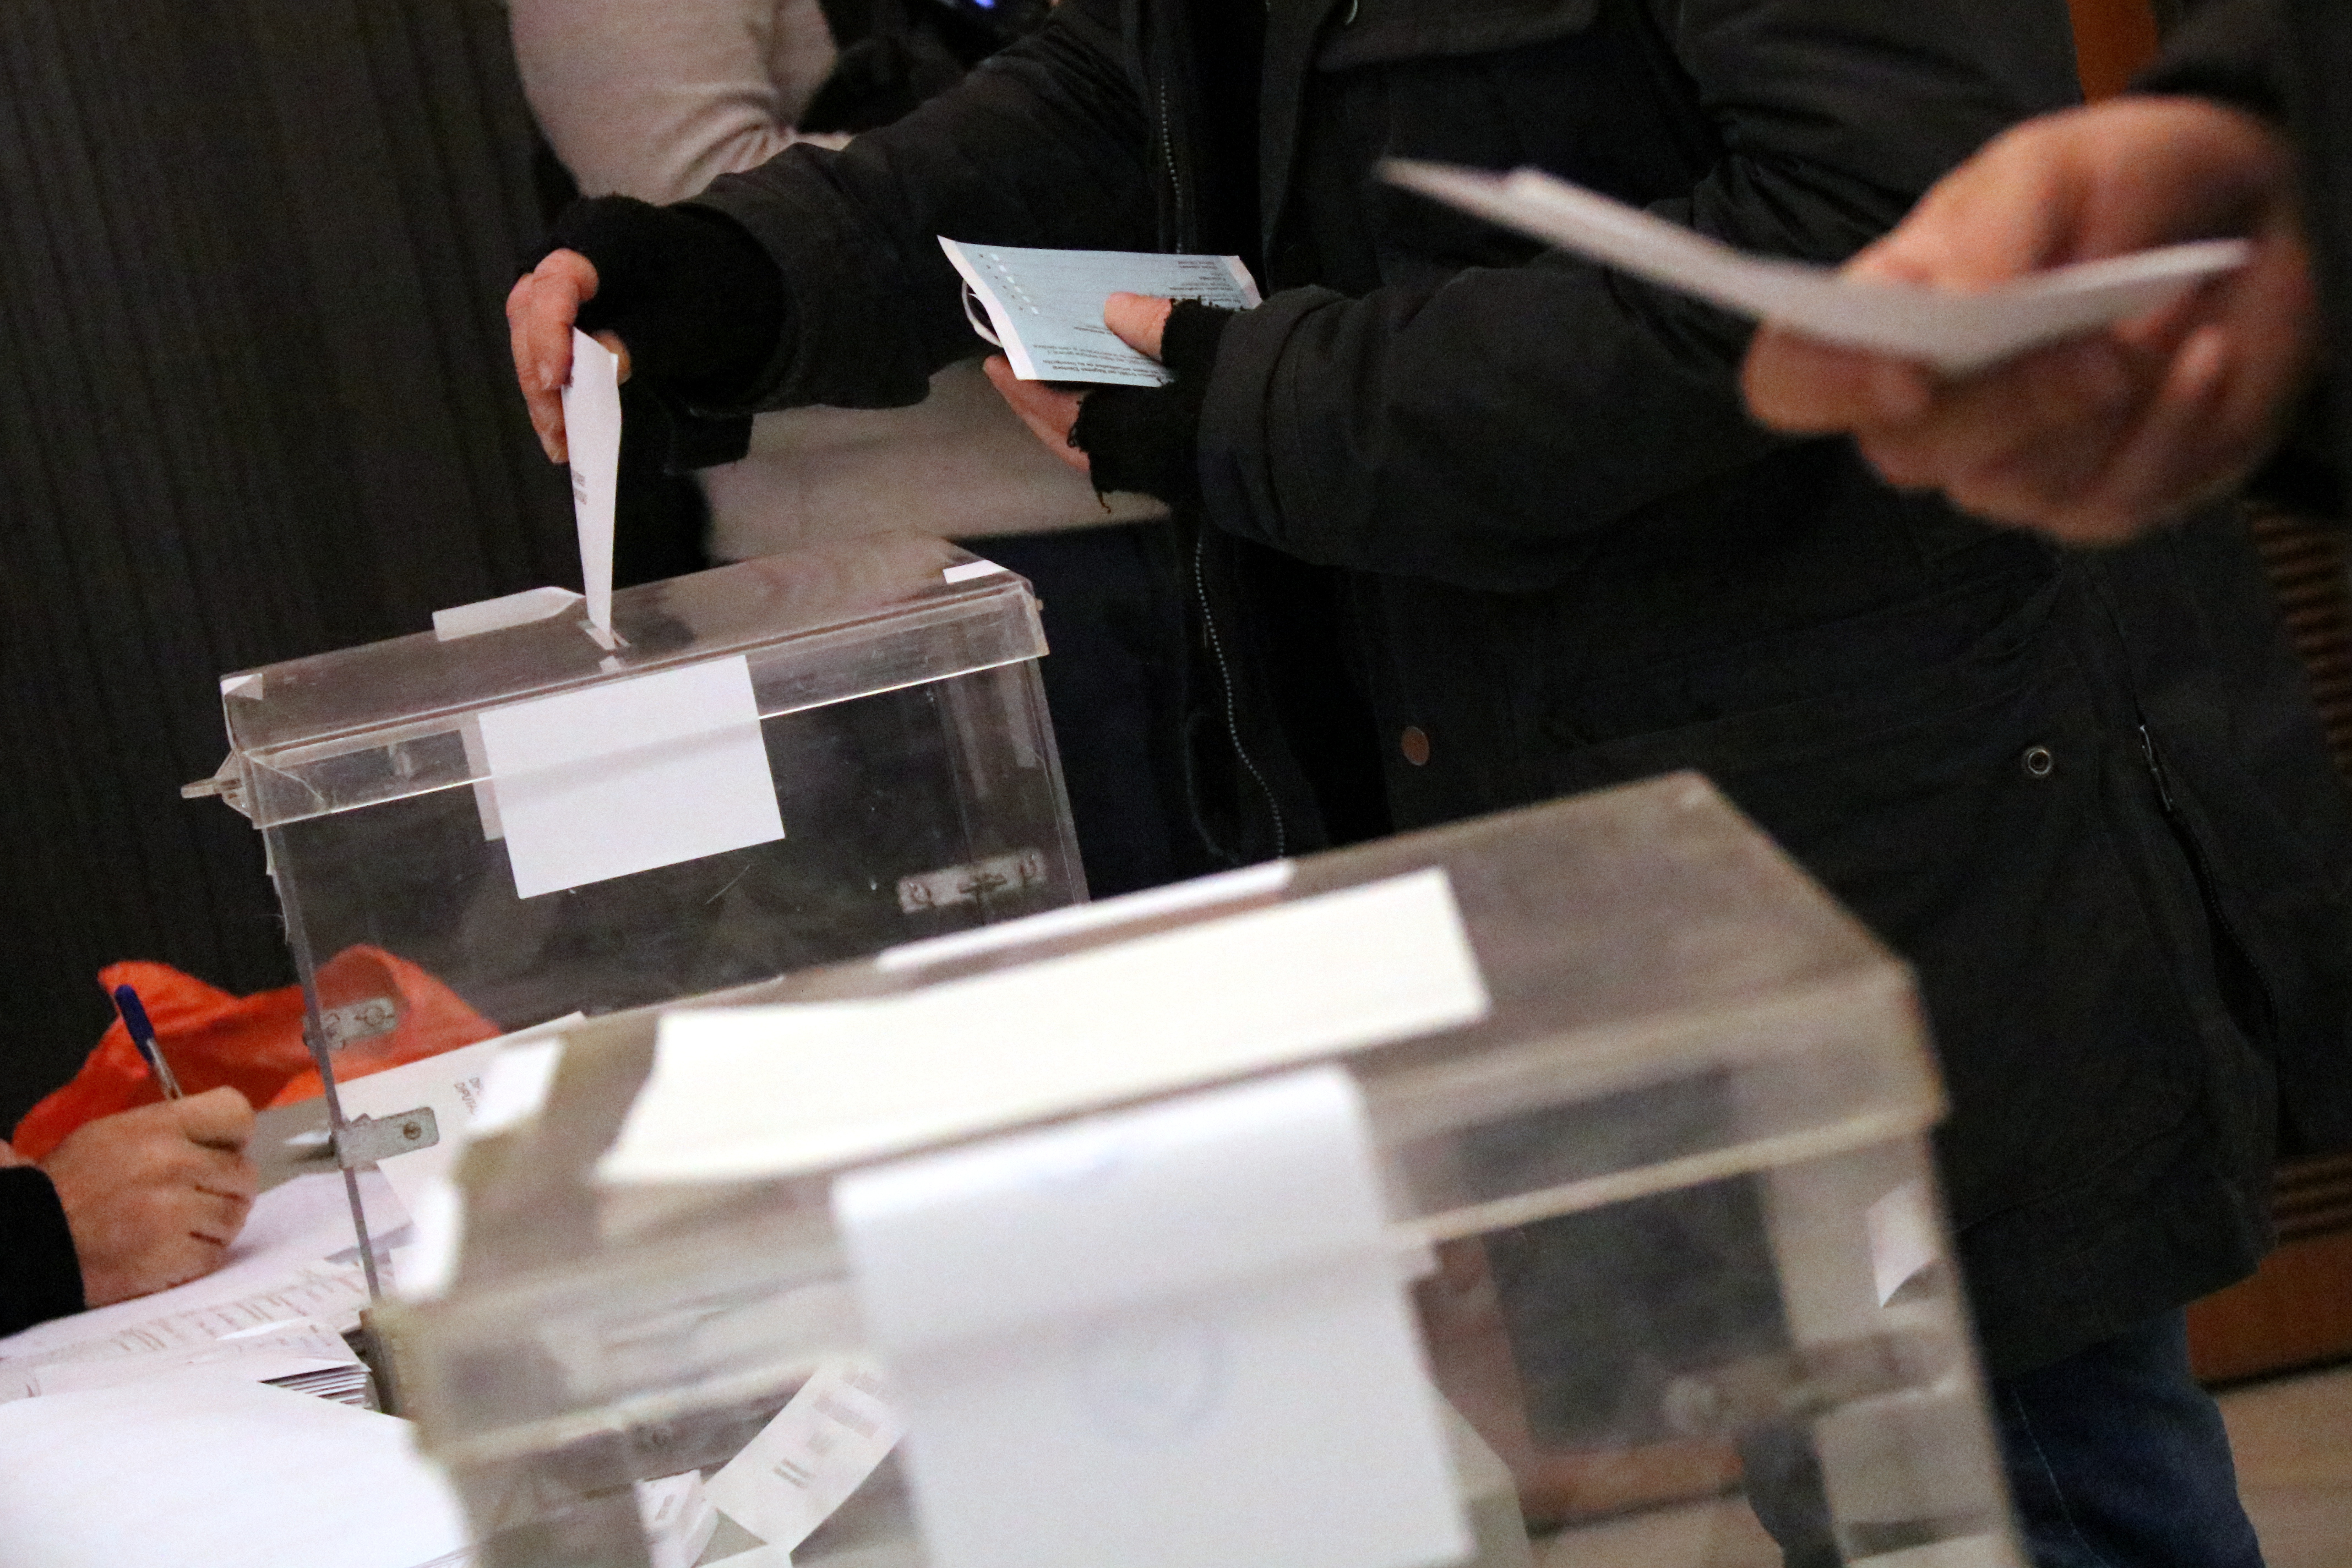 Voters cast their ballots on December 21 2017 (by Núria Julià)